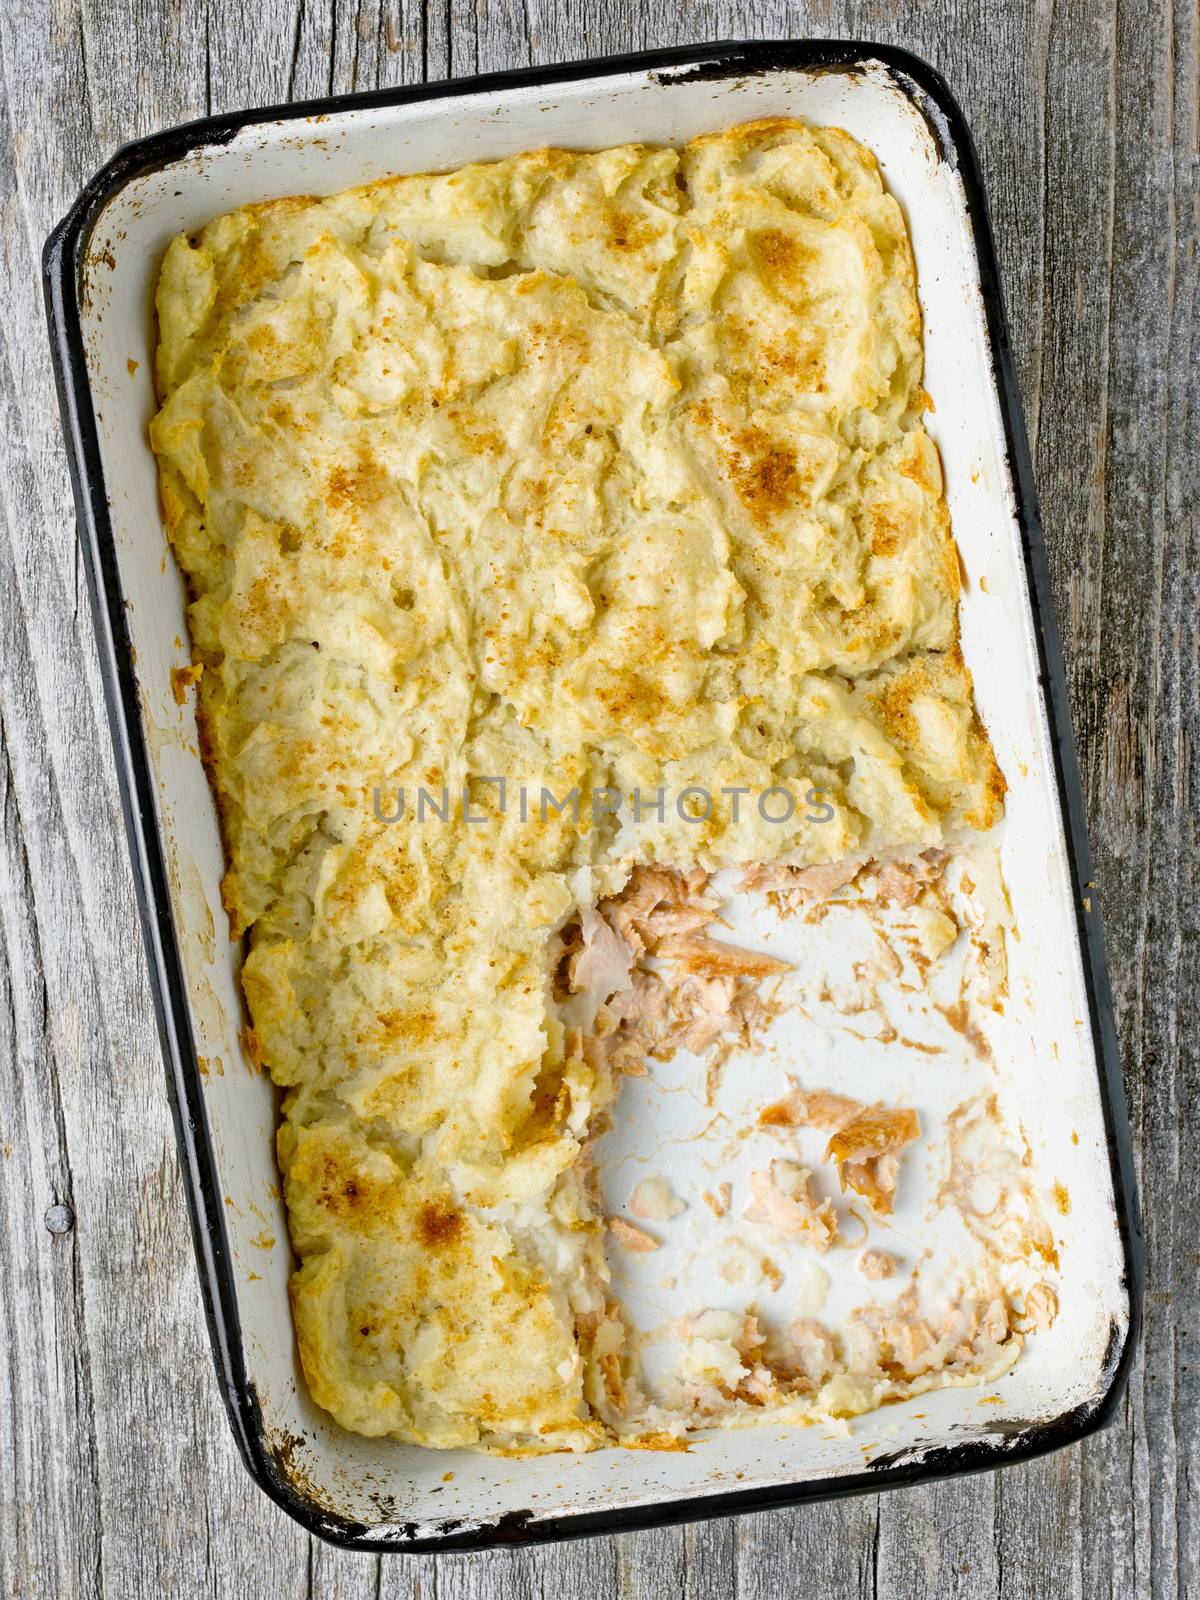 rustic english fish pie by zkruger